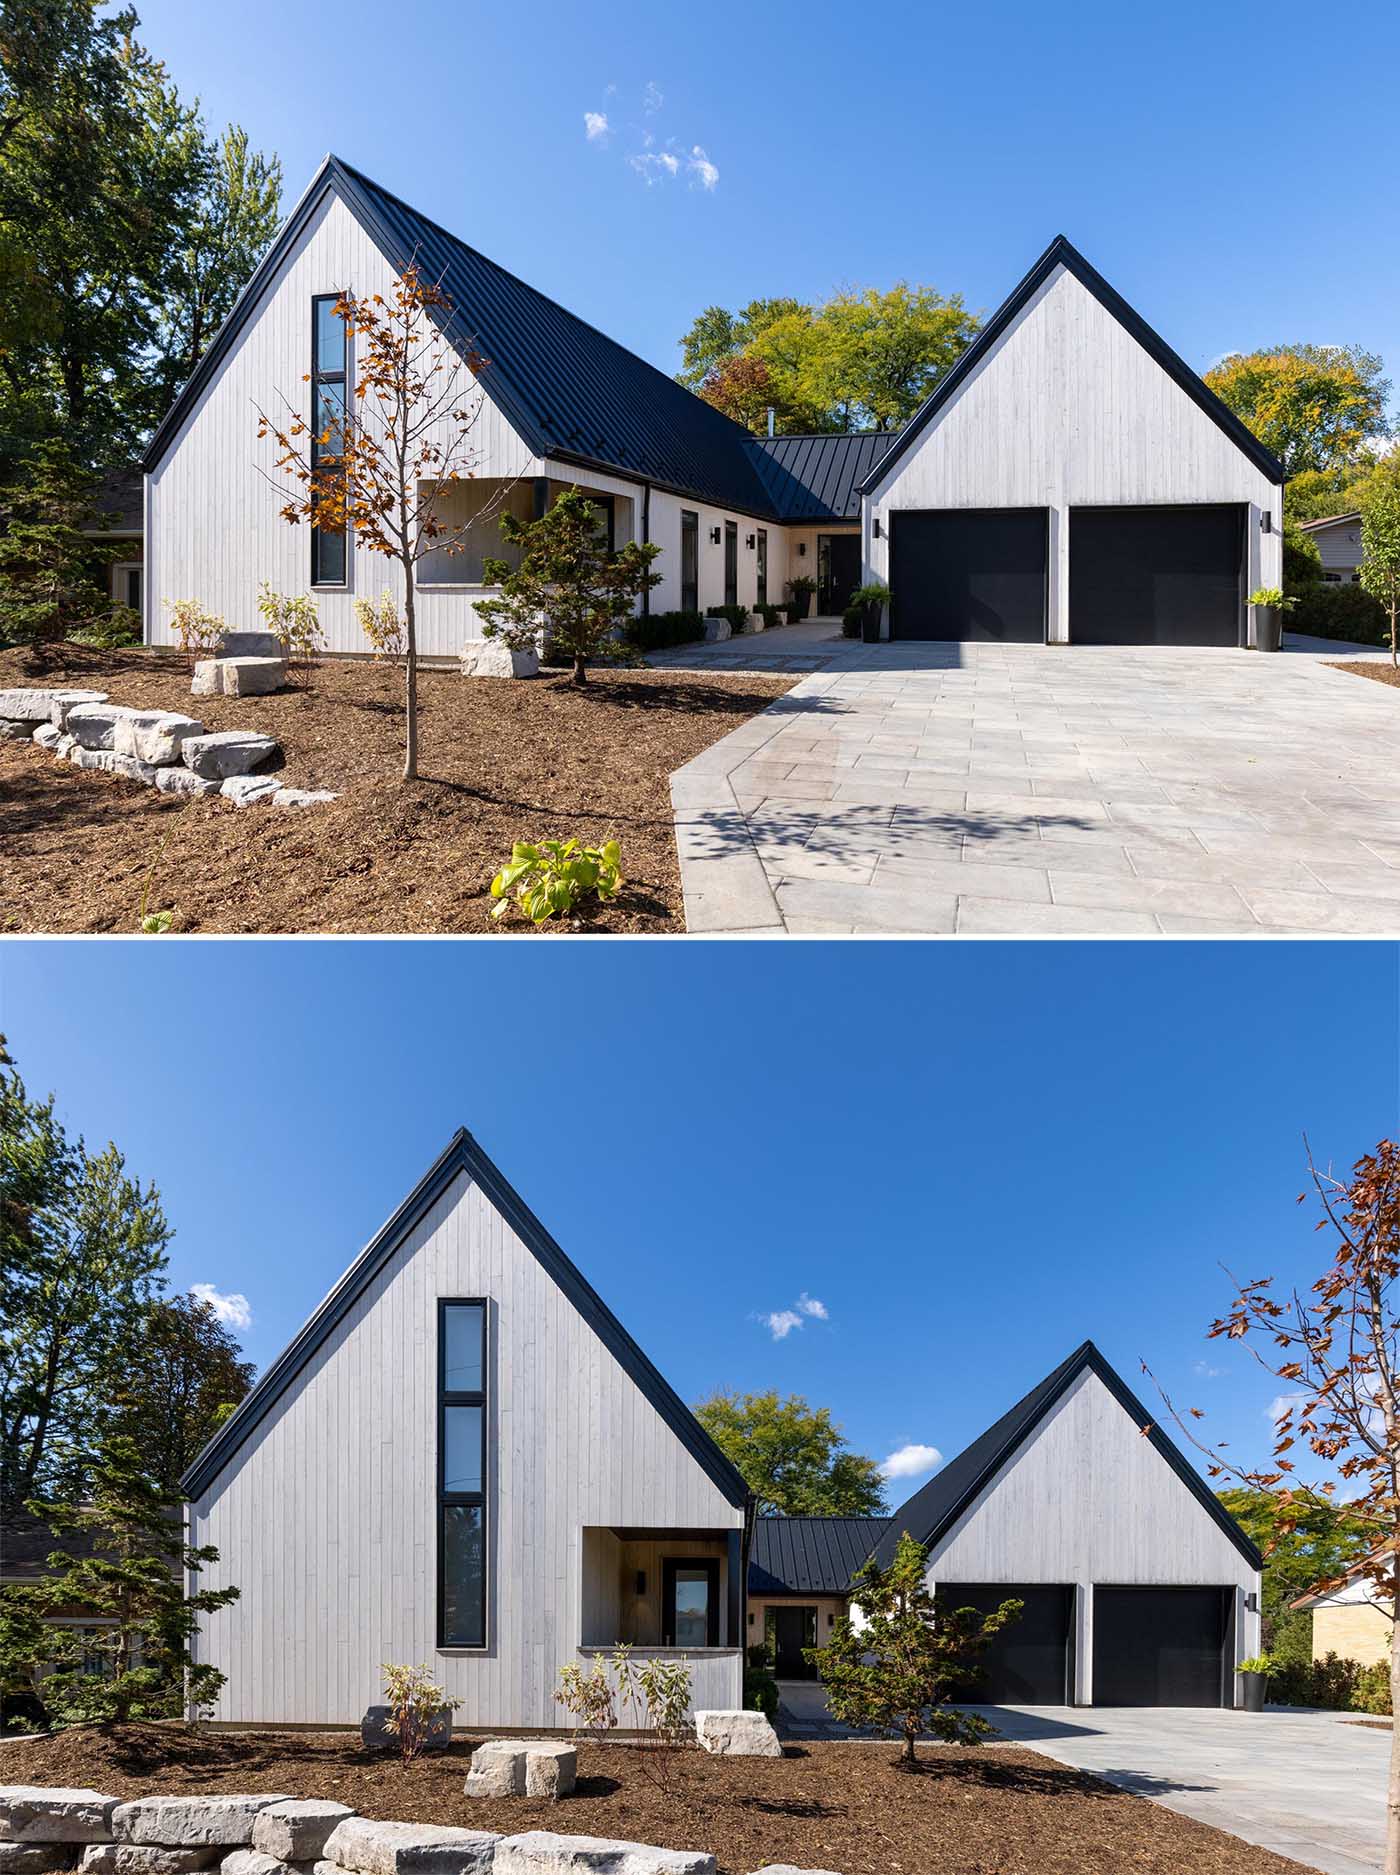 The exterior finishes of this Scandinavian inspired home includes vertical white cedar siding and standing seam metal roofs.